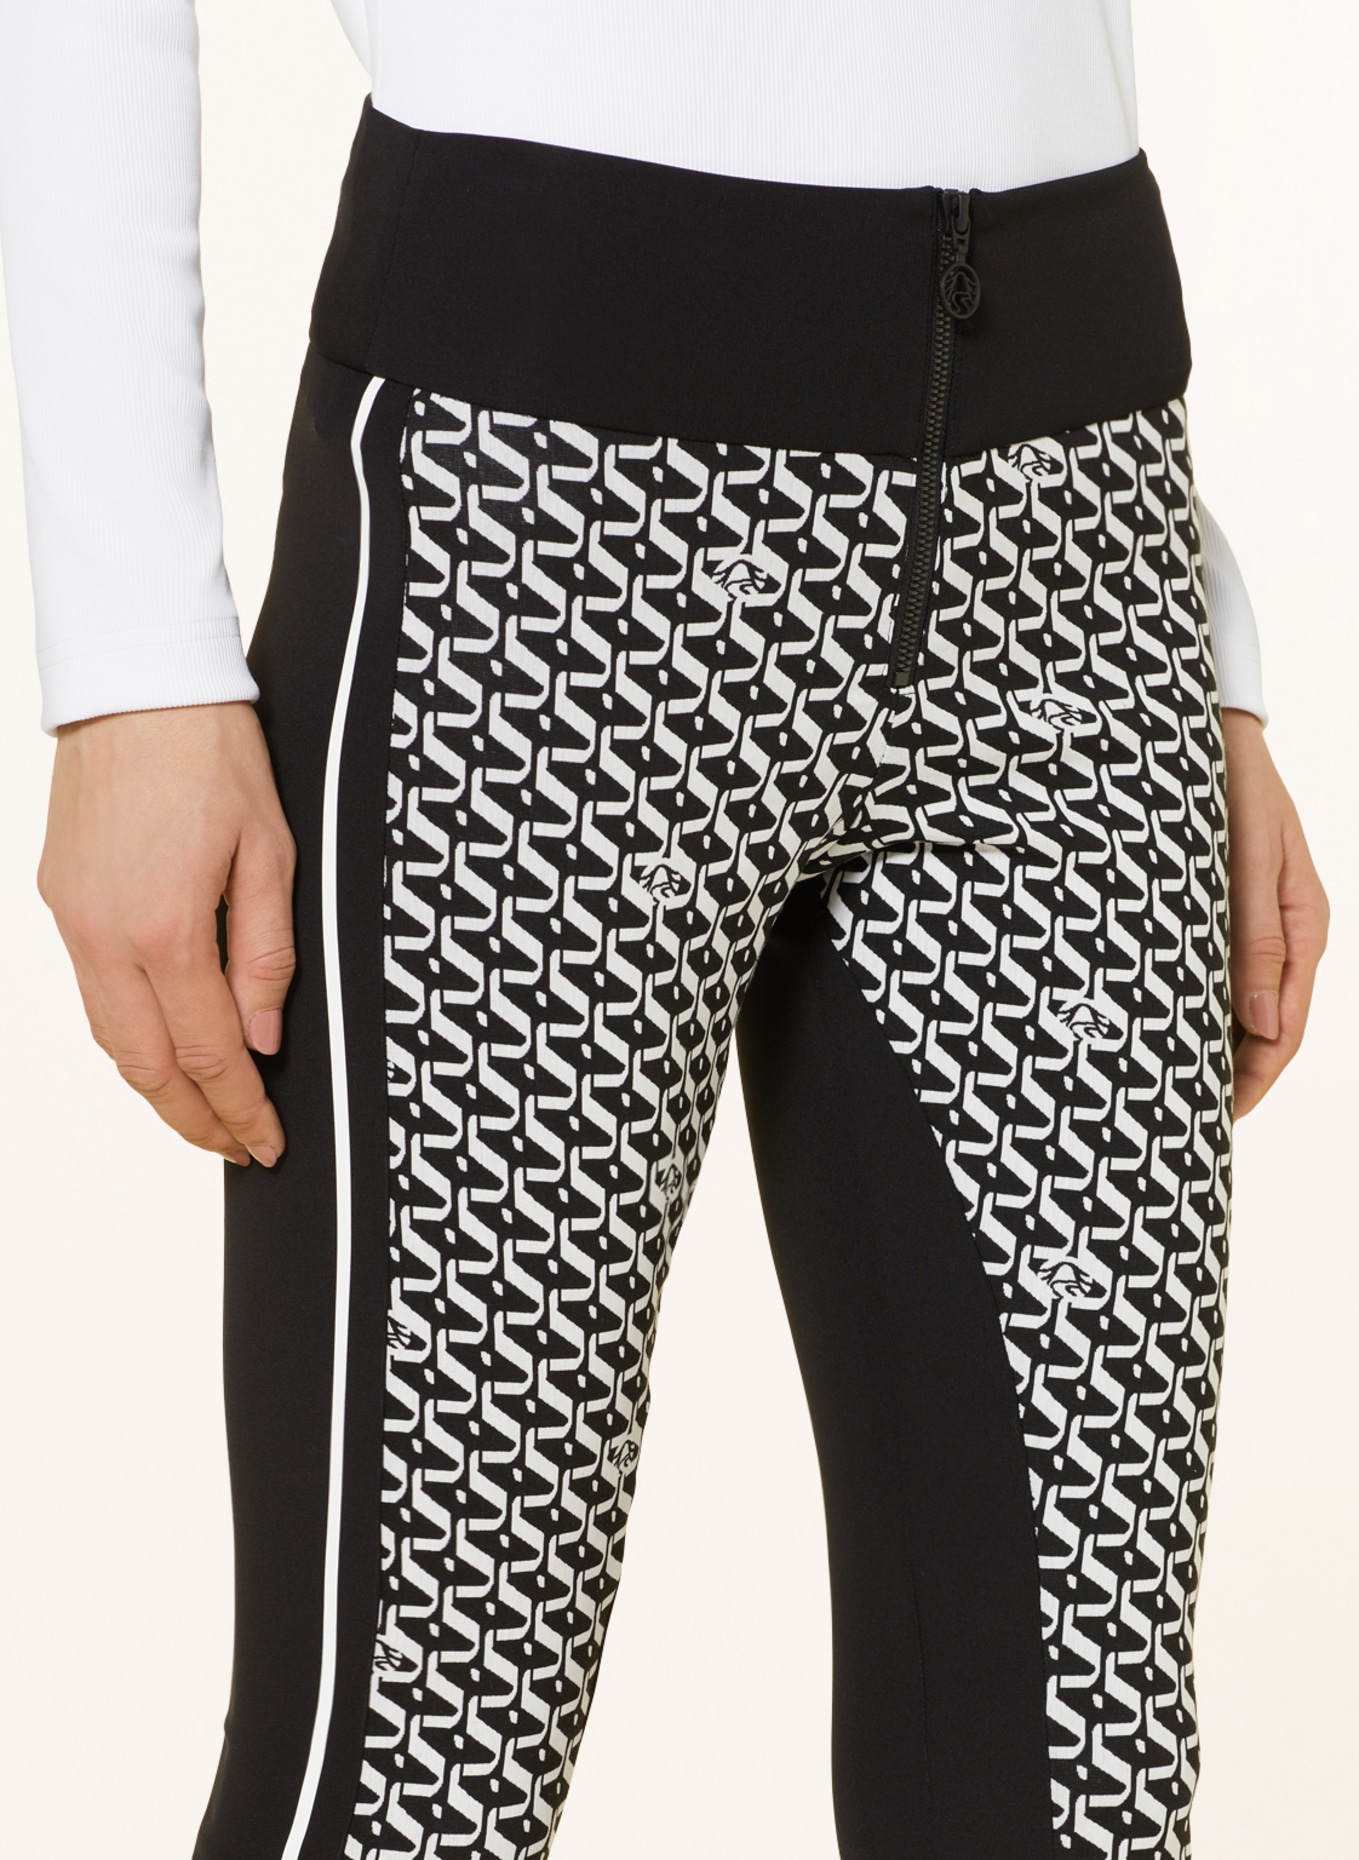 Royal & Awesome Diamonds in the Rough Golf Trousers For Men Slim Fit, Men's Golf  Trousers, Funky Golf Trousers, Tapered Mens Golf Trousers : Amazon.co.uk:  Fashion